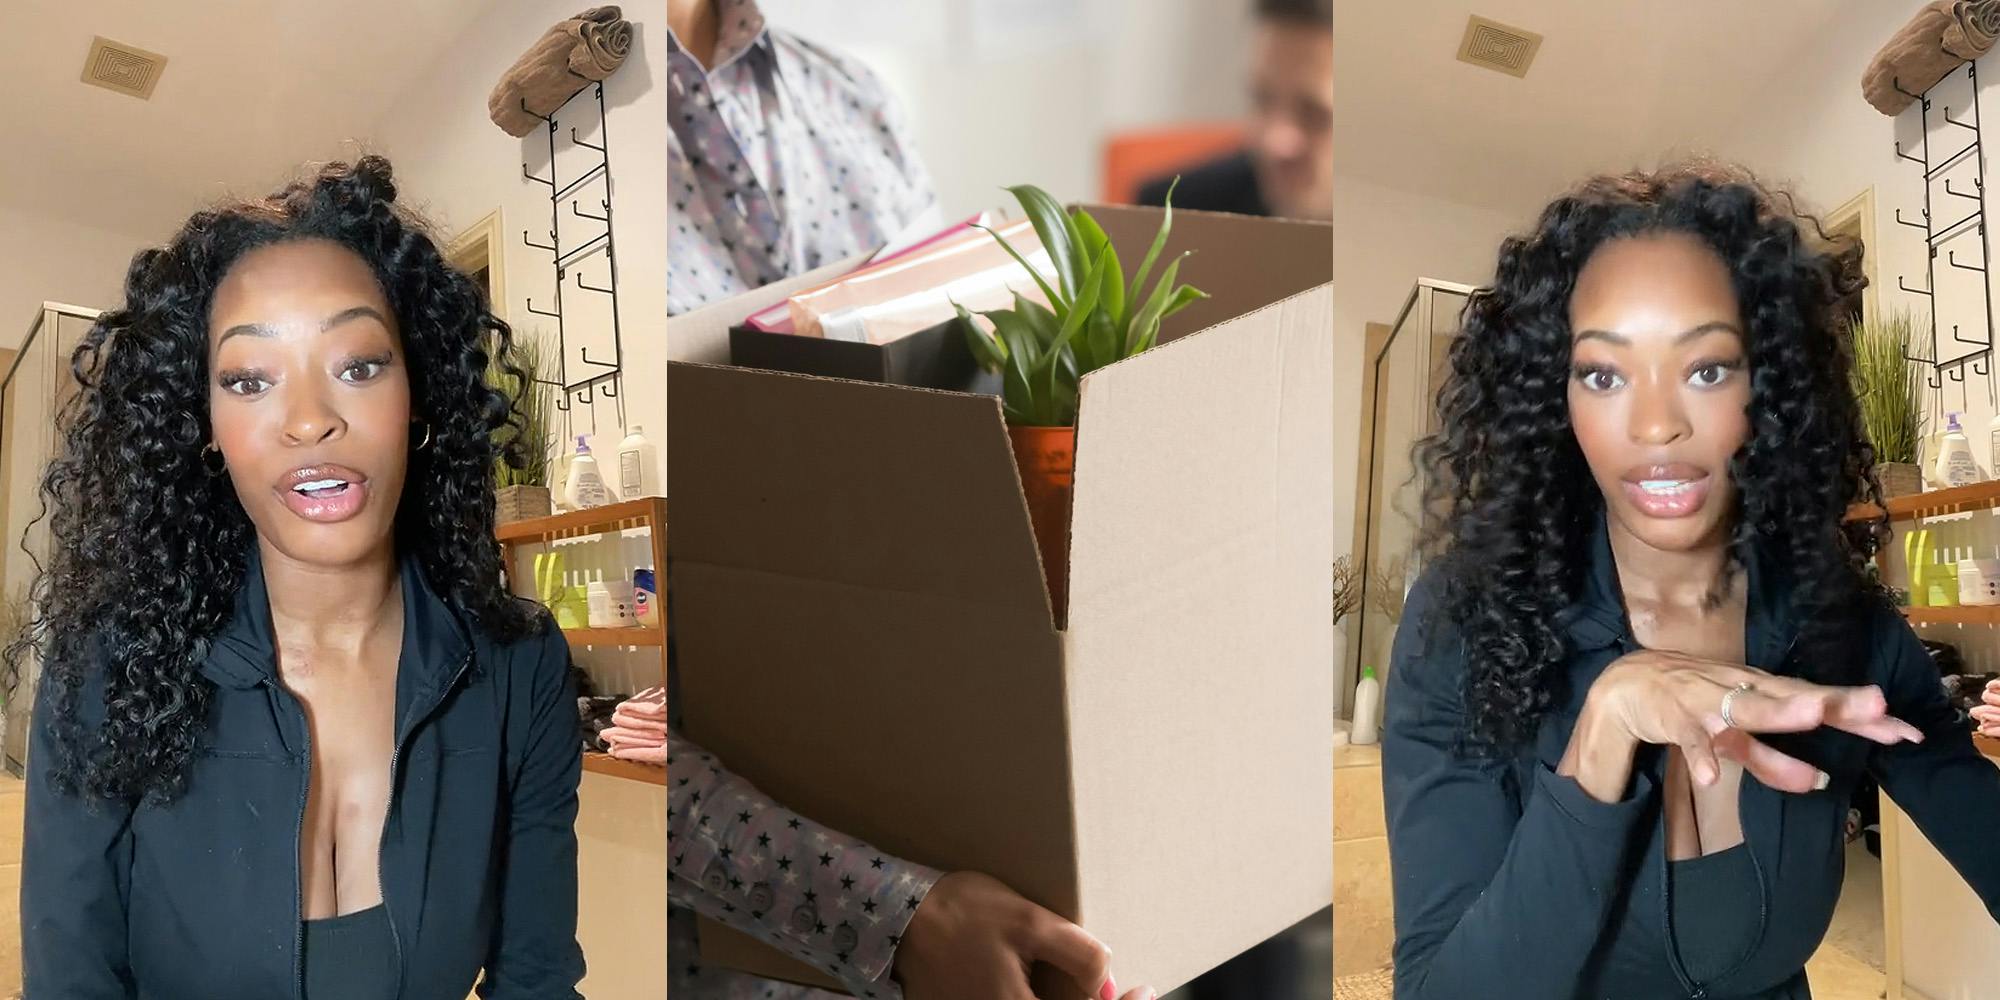 woman speaking (l) woman holding box of office items (c) woman speaking hand out (r)